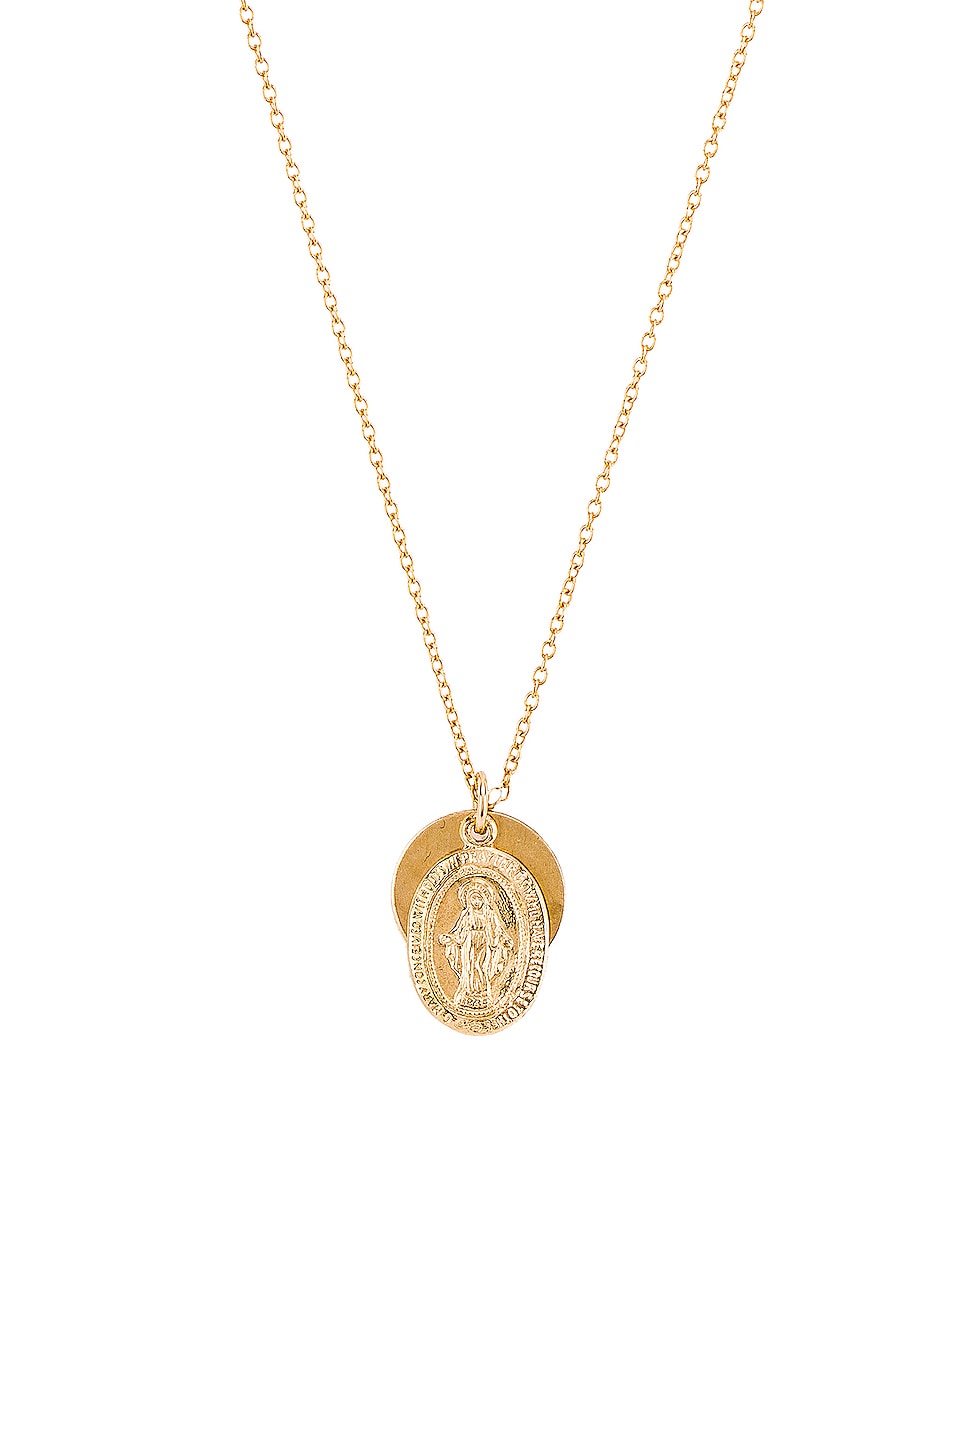 ERTH Vintage Coin Necklace in Gold | REVOLVE